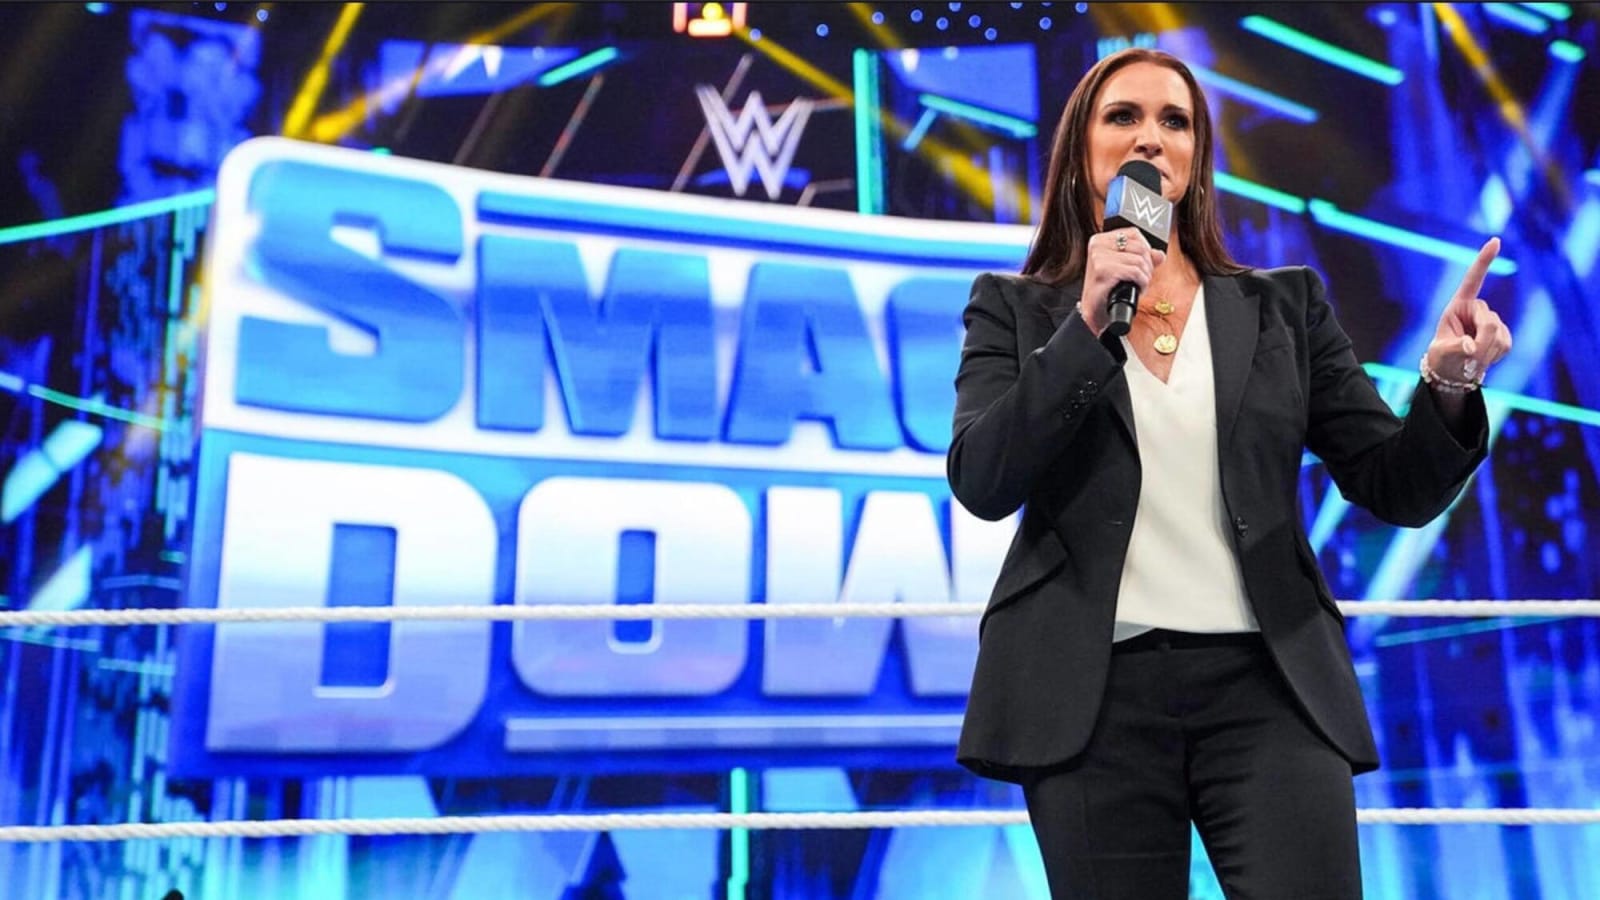 Speculation On Stephanie McMahon’s Return To WWE After Recent Appearances